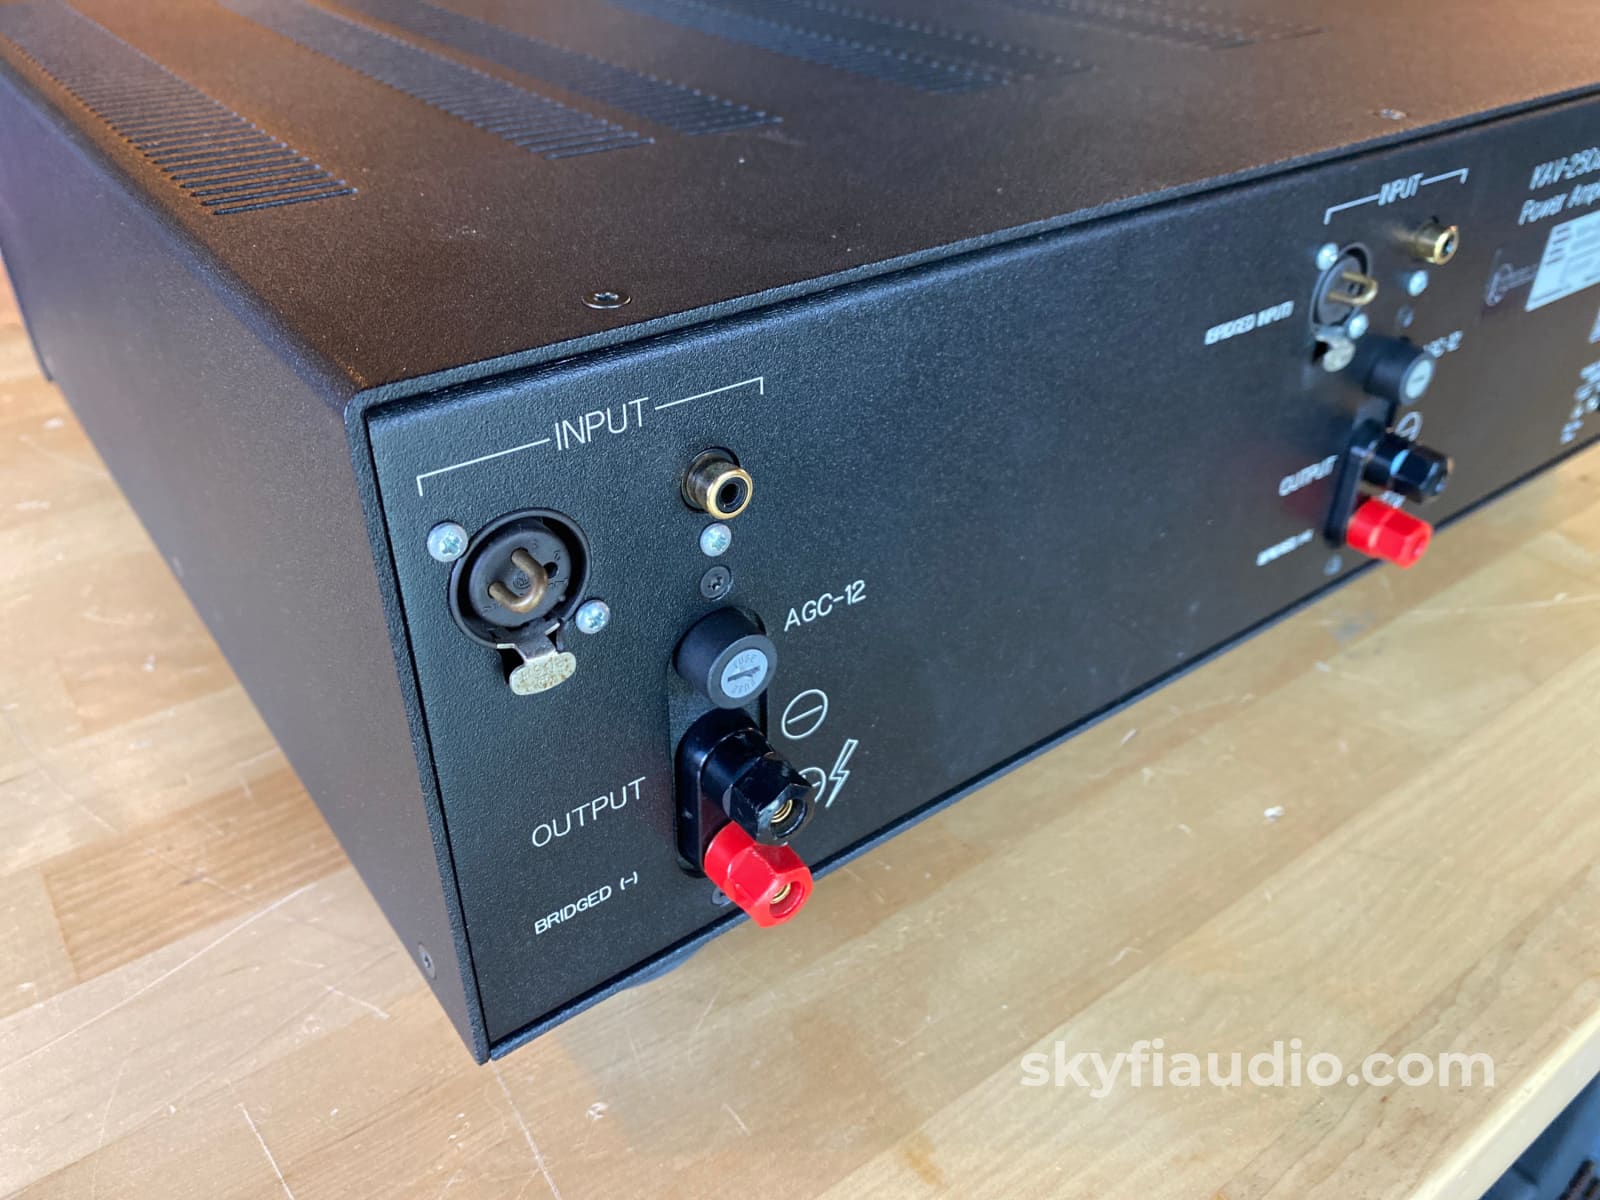 Krell Kav-250A Solid State Stereo Amplifier